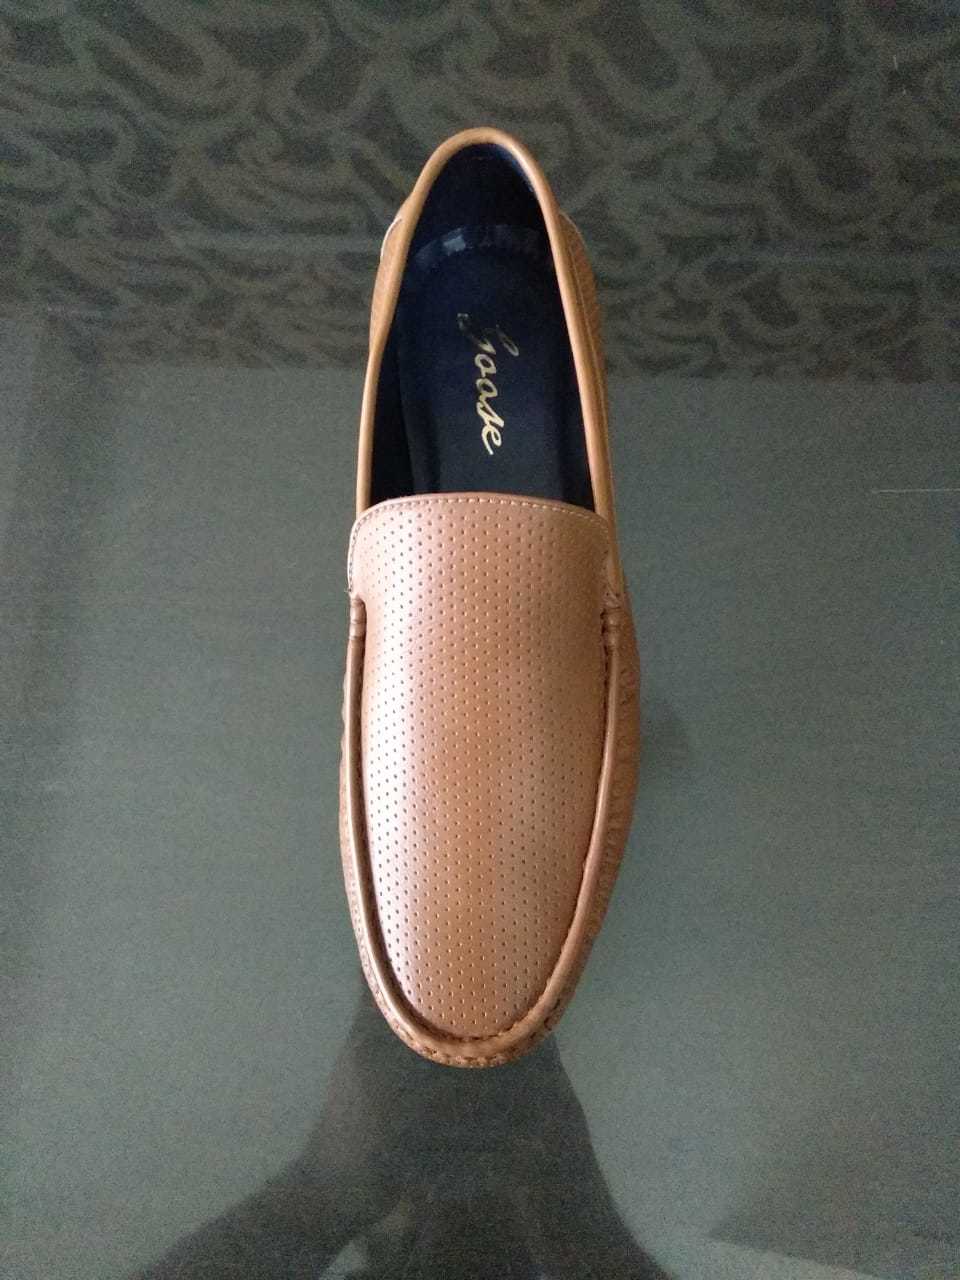 CASUAL FANCY LOAFERS SHOES FOR MEN'S